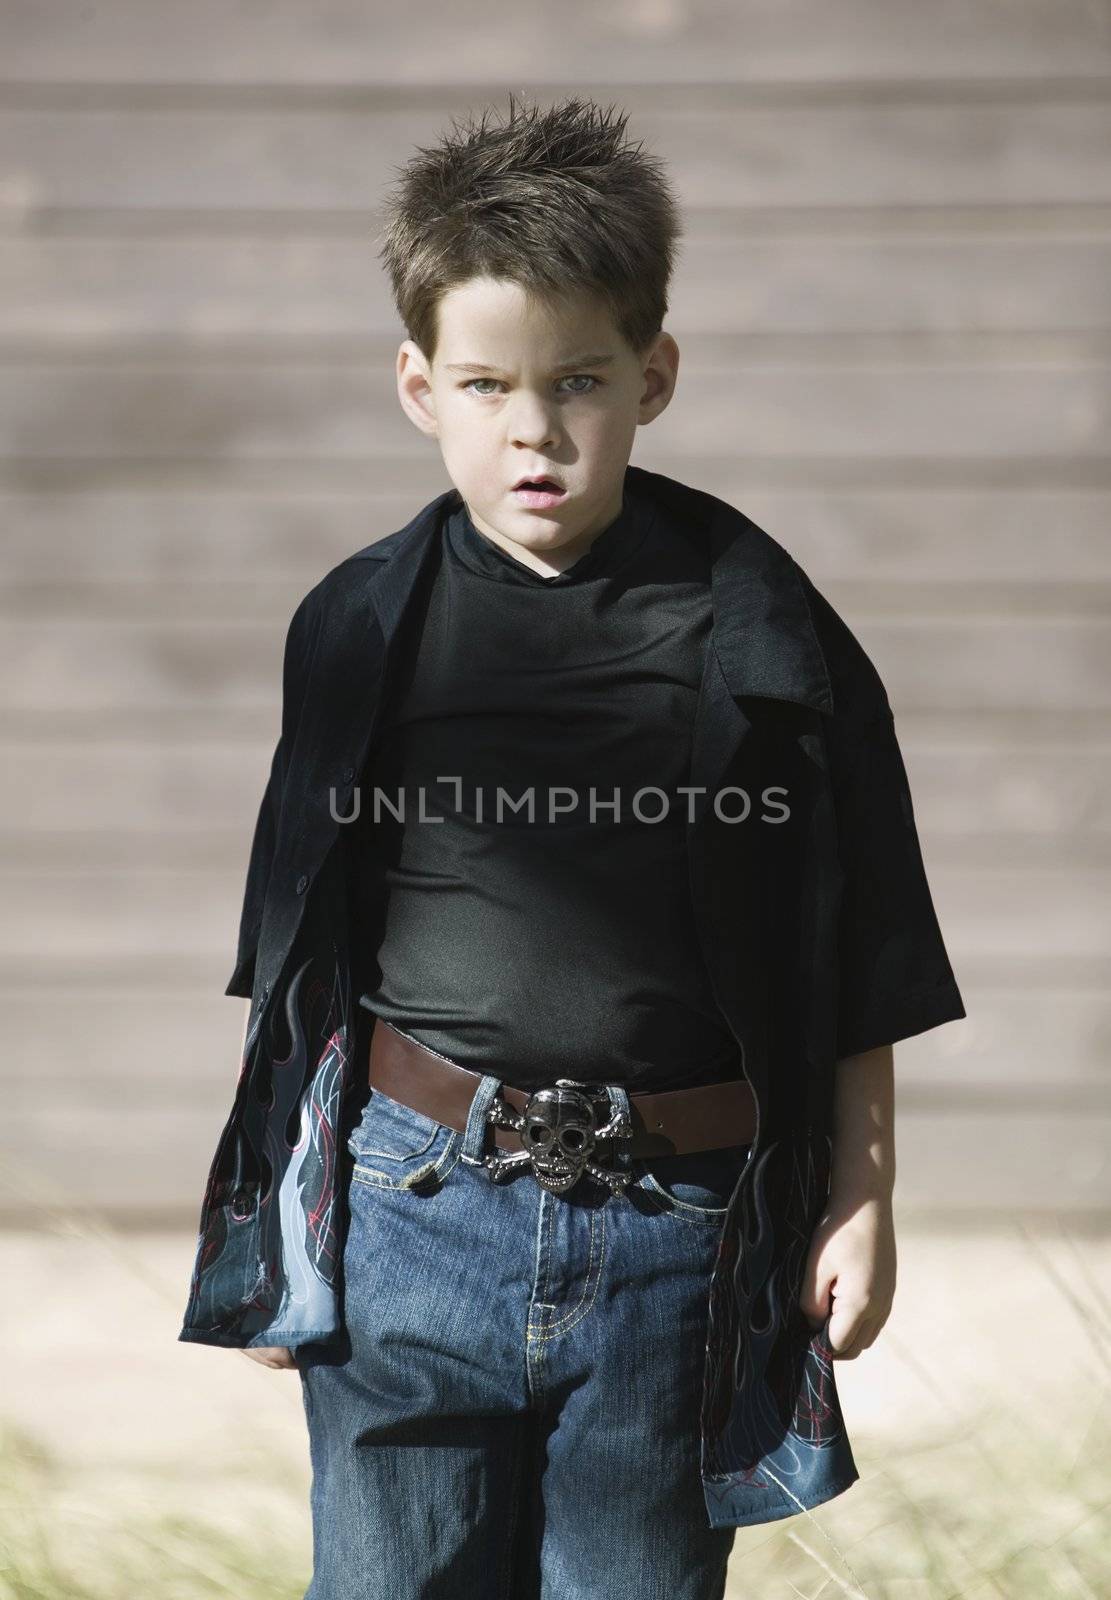 Young boy with a defiant attitude wearing a black shirt and a pirate belt buckle.